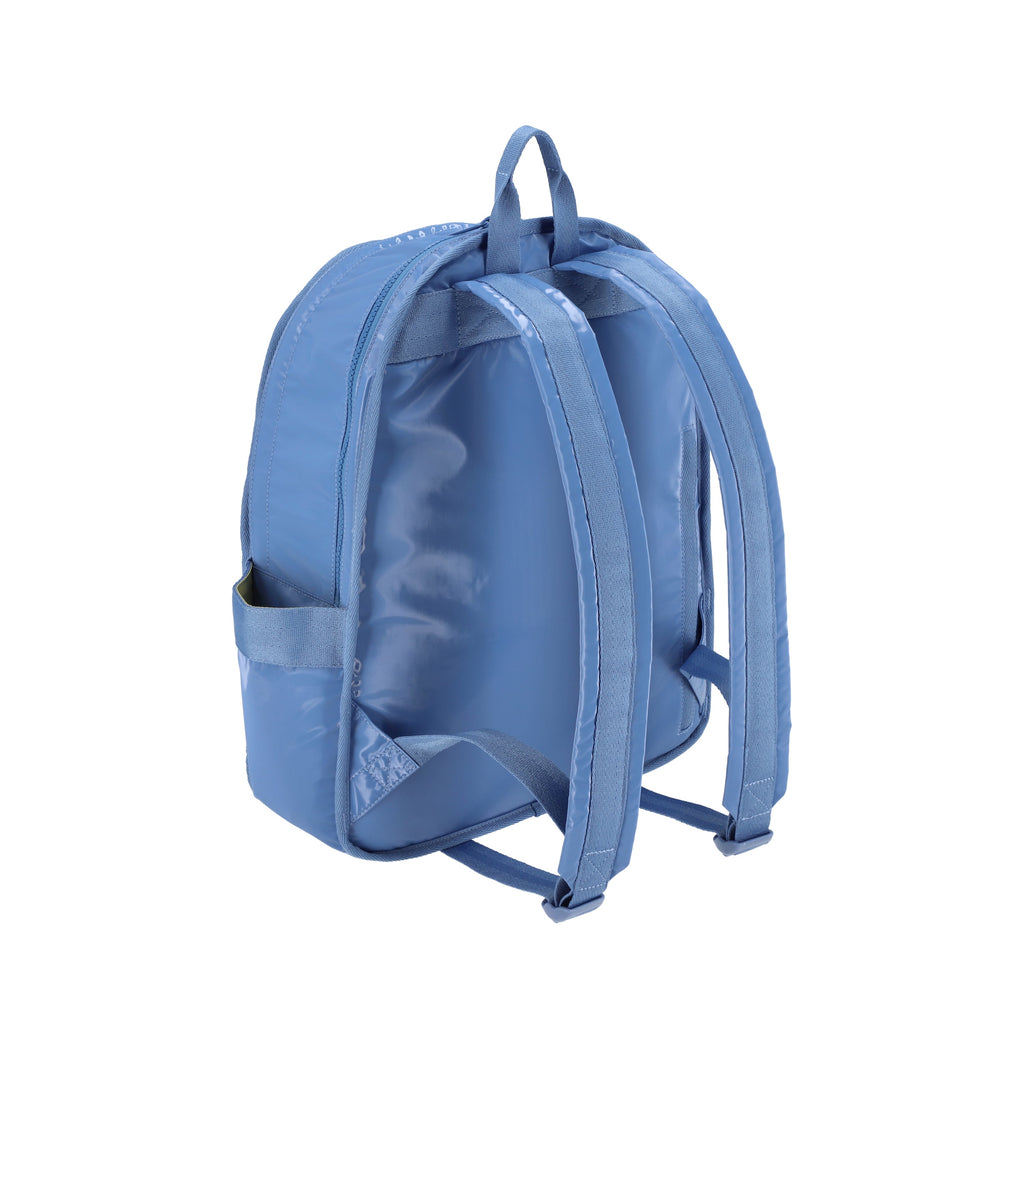 Route Backpack - Riviera Shine – LeSportsac